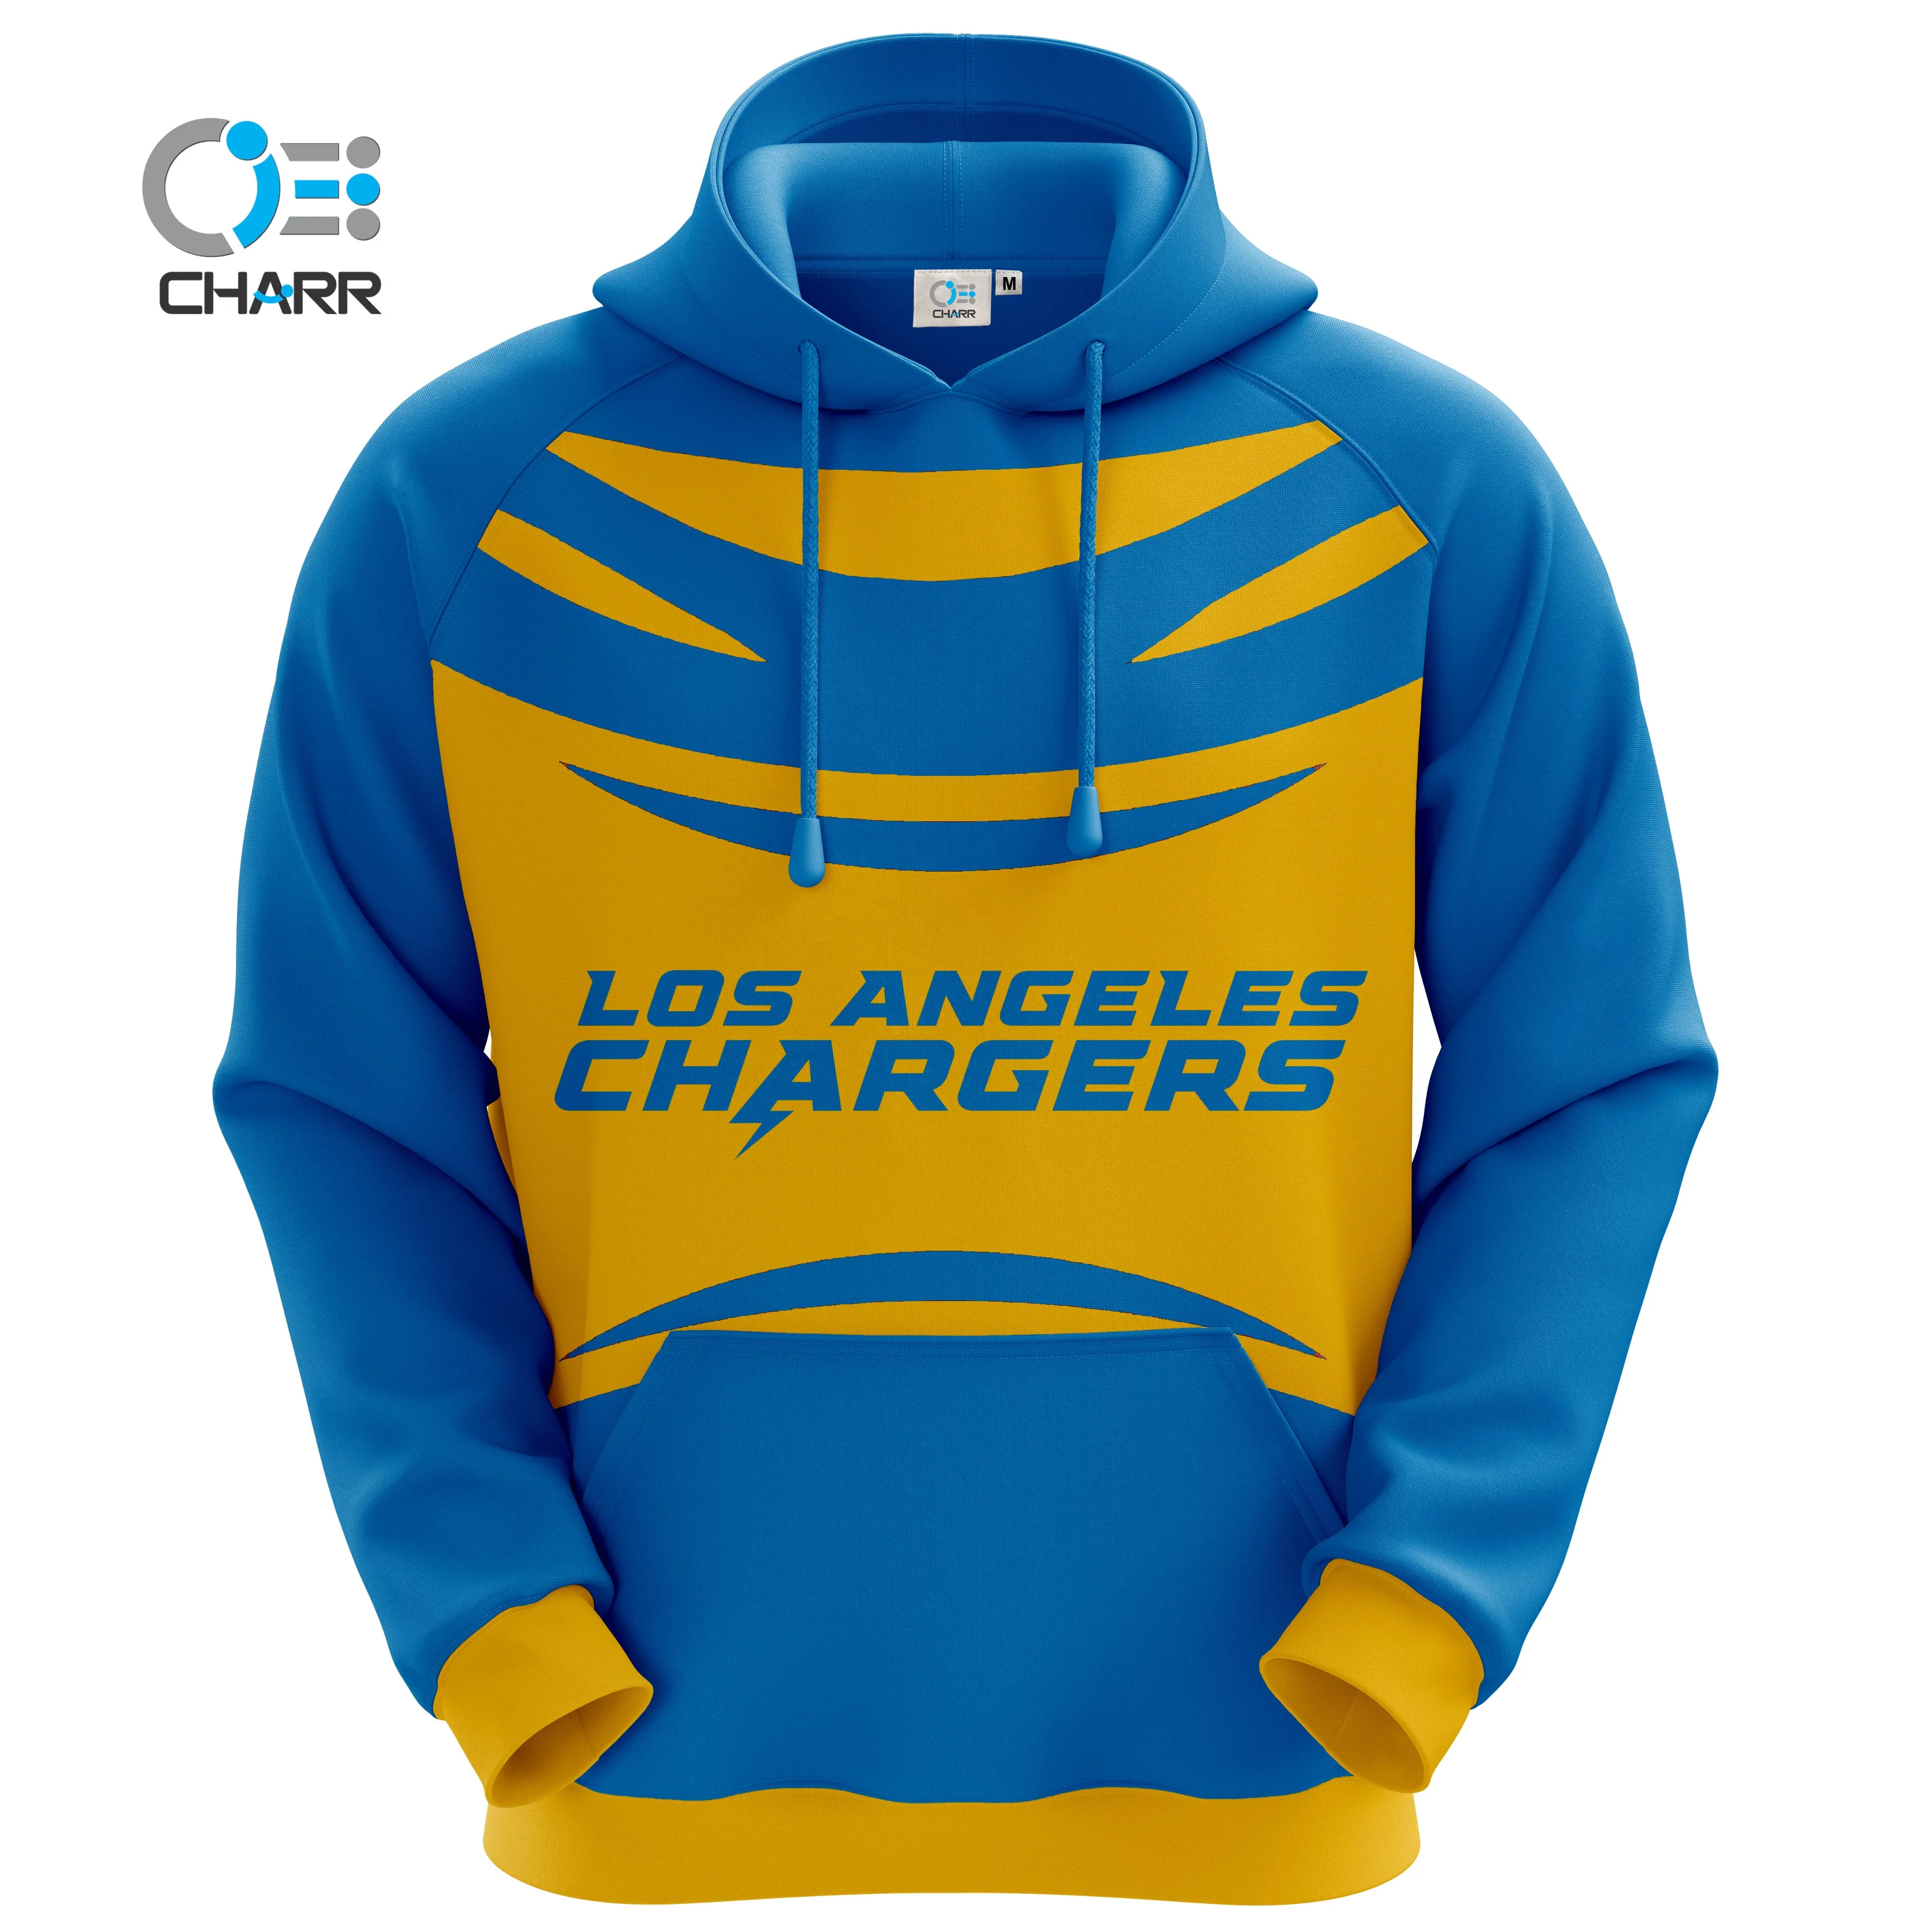 Official Los Angeles Chargers Hoodies, Chargers Sweatshirts, Fleece,  Pullovers